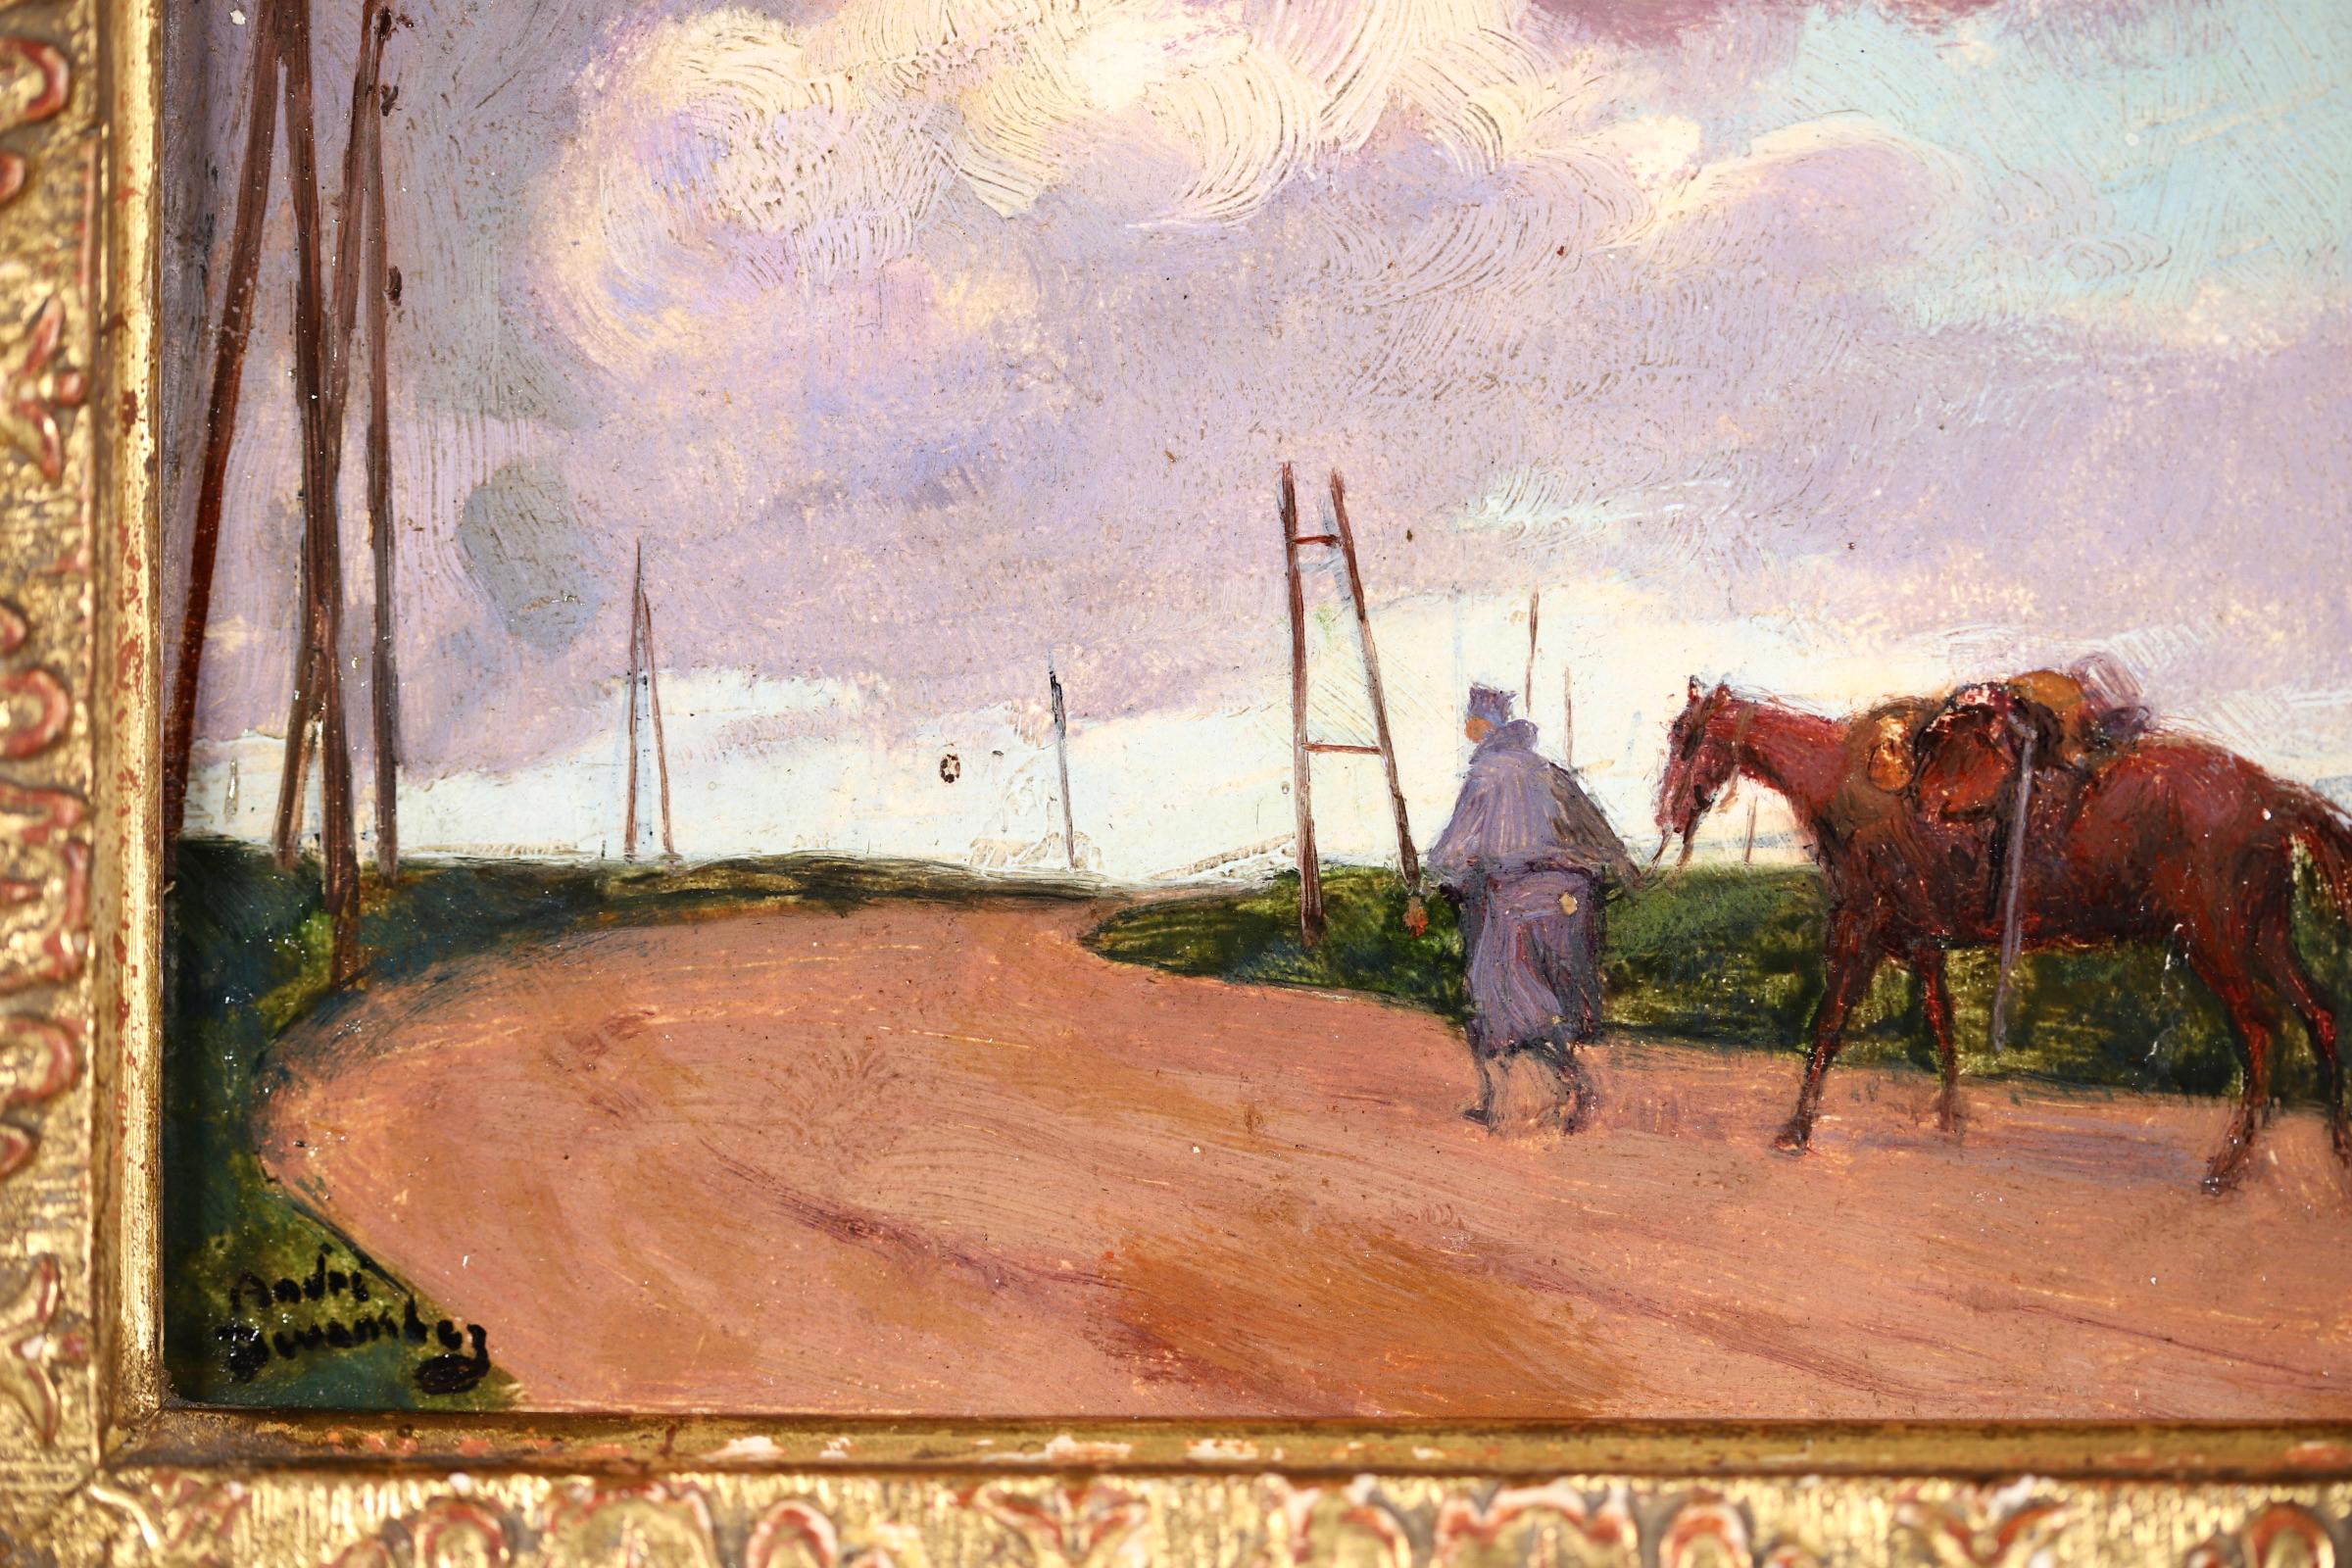 Wonderful oil on panel circa 1920 by French impressionist painter Andre Devambez. The work depicts a soldier leading his horse along a dirt track during The Great War. A simple but poignant piece and beautifully brushed.

Signature:
Signed lower